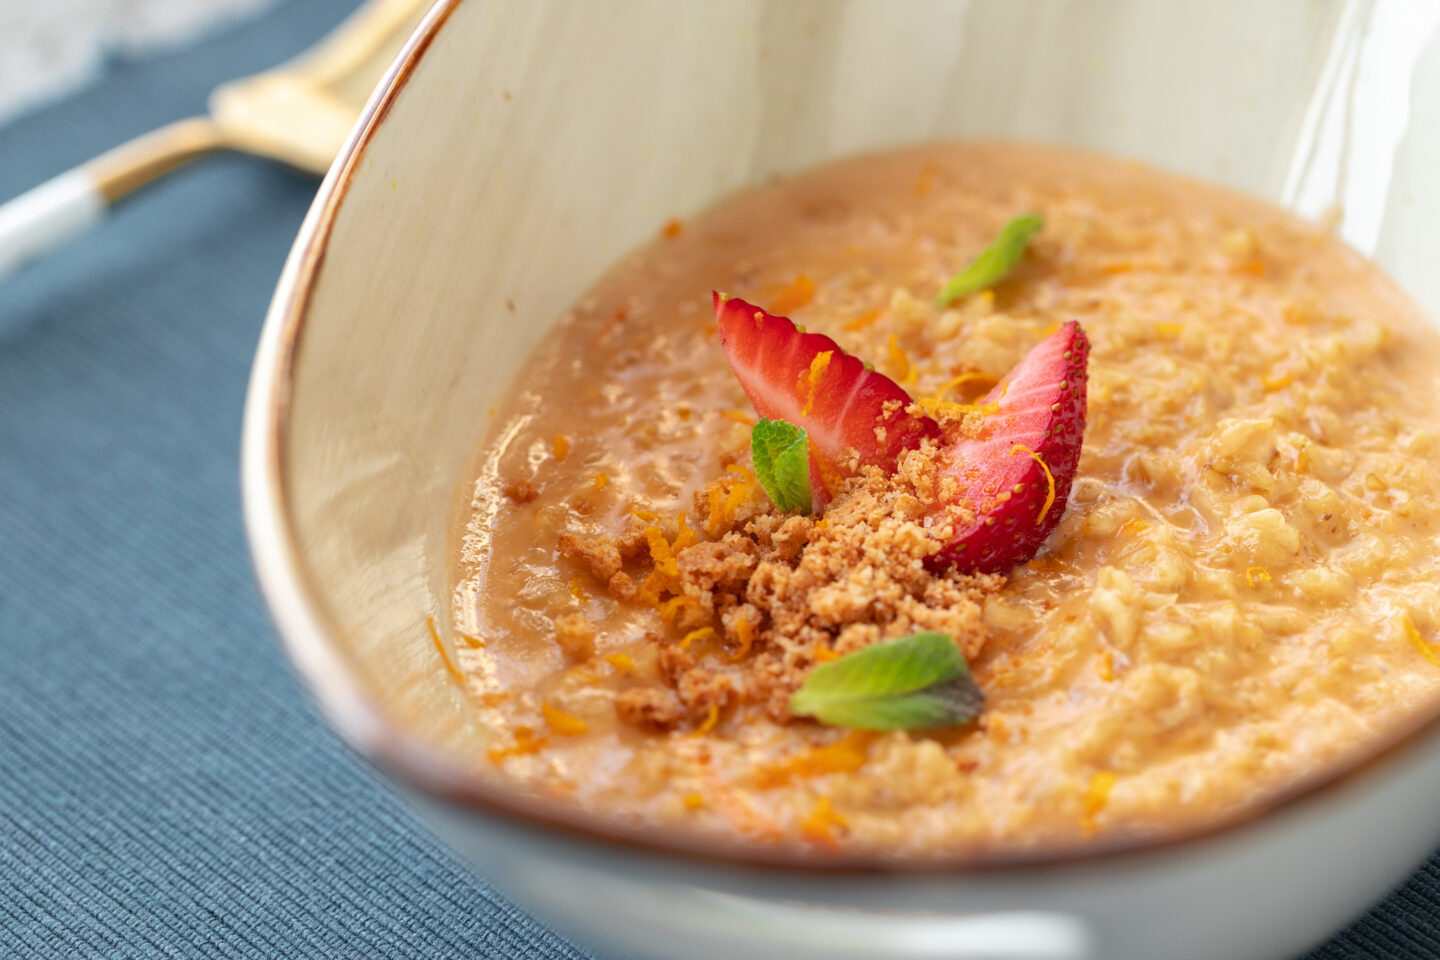 Bowl of oatmeal porridge with strawberry and mint